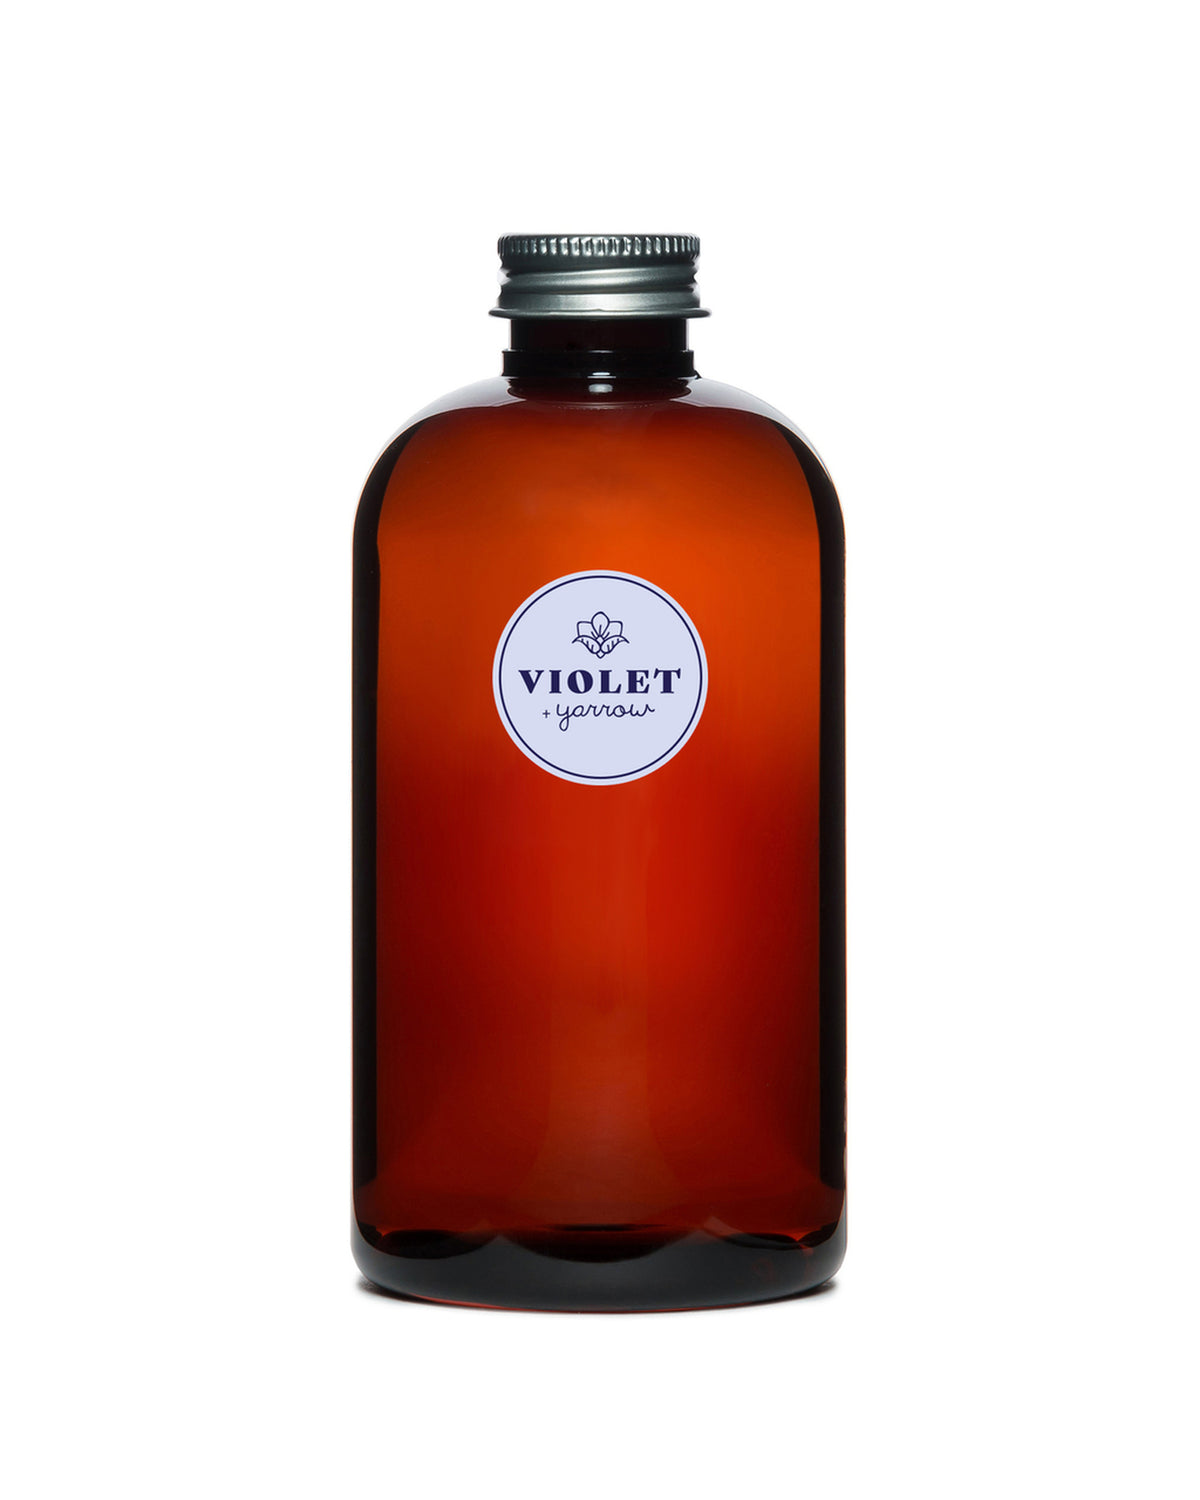 Amber glass bottle with a black cap and label reading "U.S. Apothecary Violet + Yarrow Diffuser Oil Refill" in a decorative script, centered on a white and purple U.S. Apothecary logo. The background is white and uniform.